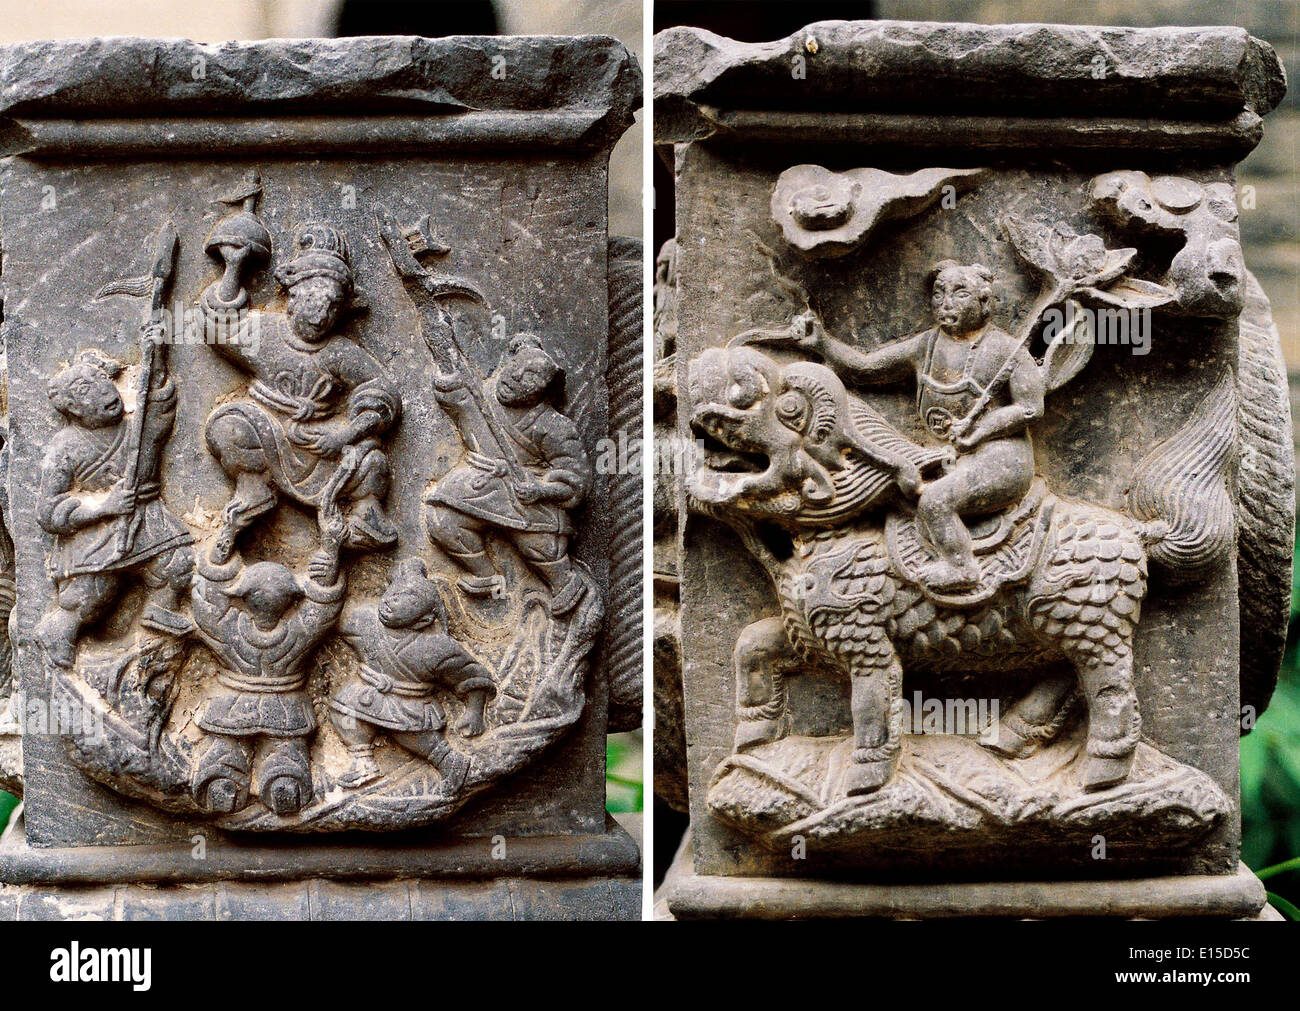 (140523) -- ZHENGZHOU, May 23, 2014 (Xinhua) -- This photo combination shows two Ming Dynasty (1368-1644 AD) stone column bases with human and beast sculptures at the Shanxi-Shaanxi-Gansu Guild in Kaifeng, central China's Henan Province, March 8, 2006. A large number of architectural sculptures have been preserved in historical sites of Henan, which is one of the cradles of the Chinese civilization. Many of the sculptures, created from stones, bricks, or wood, were used as building parts of residences, shrines and memorial archways, among other architecture types. Underlining both the mood and Stock Photo